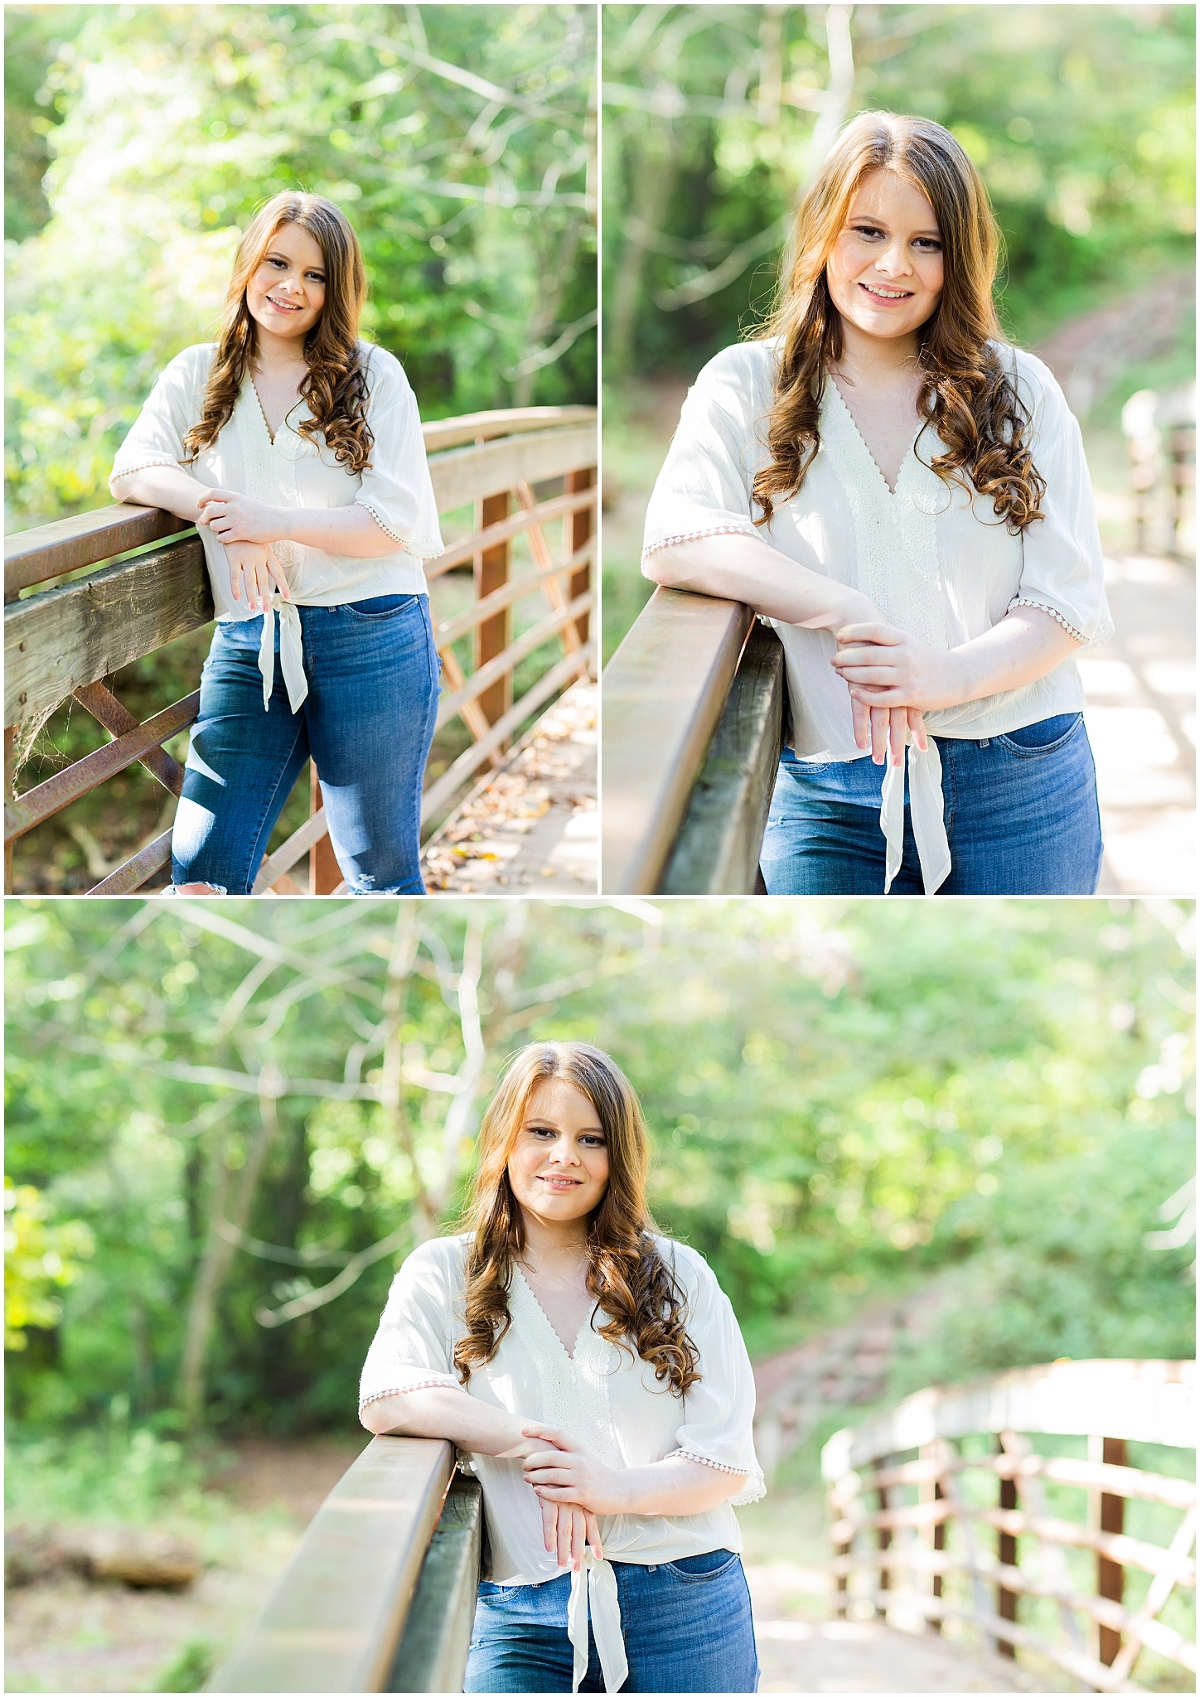 Look at these adorable senior! She booked a mini senior session with me and it was a blast! Outdoors at Elanor C. Lawrence Park in Fairfax, VA. Beautiful end of summer weather. There is an adorable footbridge, btw. Click to view full session! Photographed by Bethanie Vetter Photography LLC.#ElanorCLawrence #ElanorCLawrencePark #ECLawrencePark #footbridge #fairfaxva #senior #seniorsession #highschoolsenior #gradphotos #seniorphotos